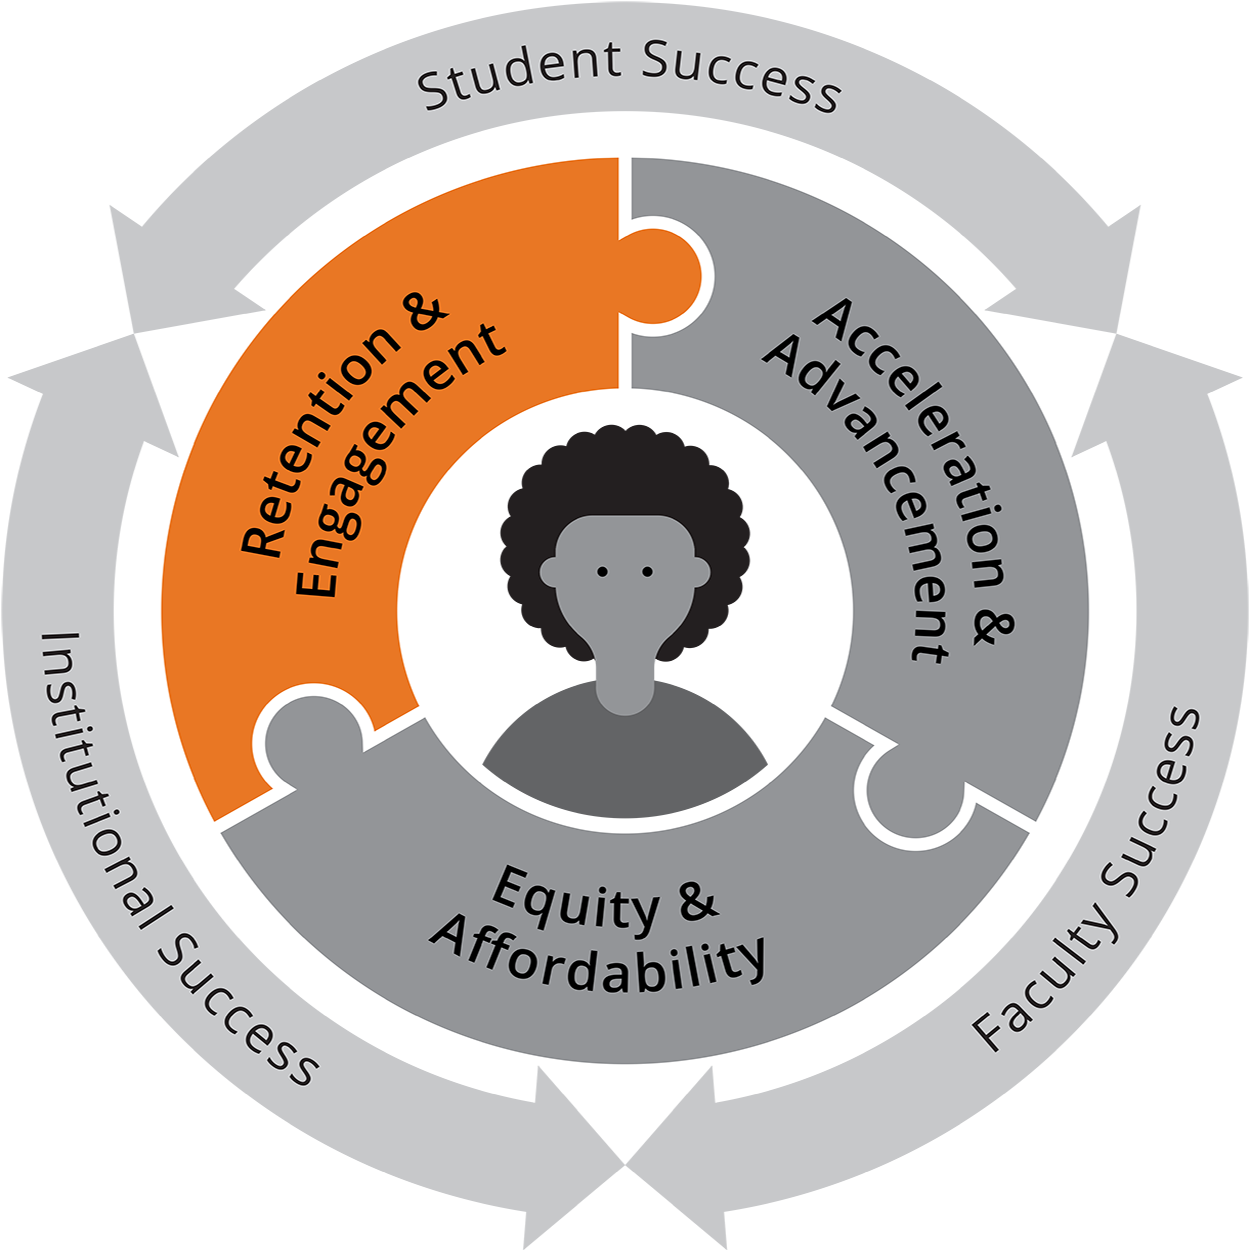 Gray circle graphic with "Student, Institutional, and Faculty Success" written on the outer ring. The middle ring is three connecting puzzle pieces that read: Retention & Engagnement, Acceleration & Advancement, and Equity & Affordability. In the center is an image of a student. Retententon & Engagement piece stands out in orange.